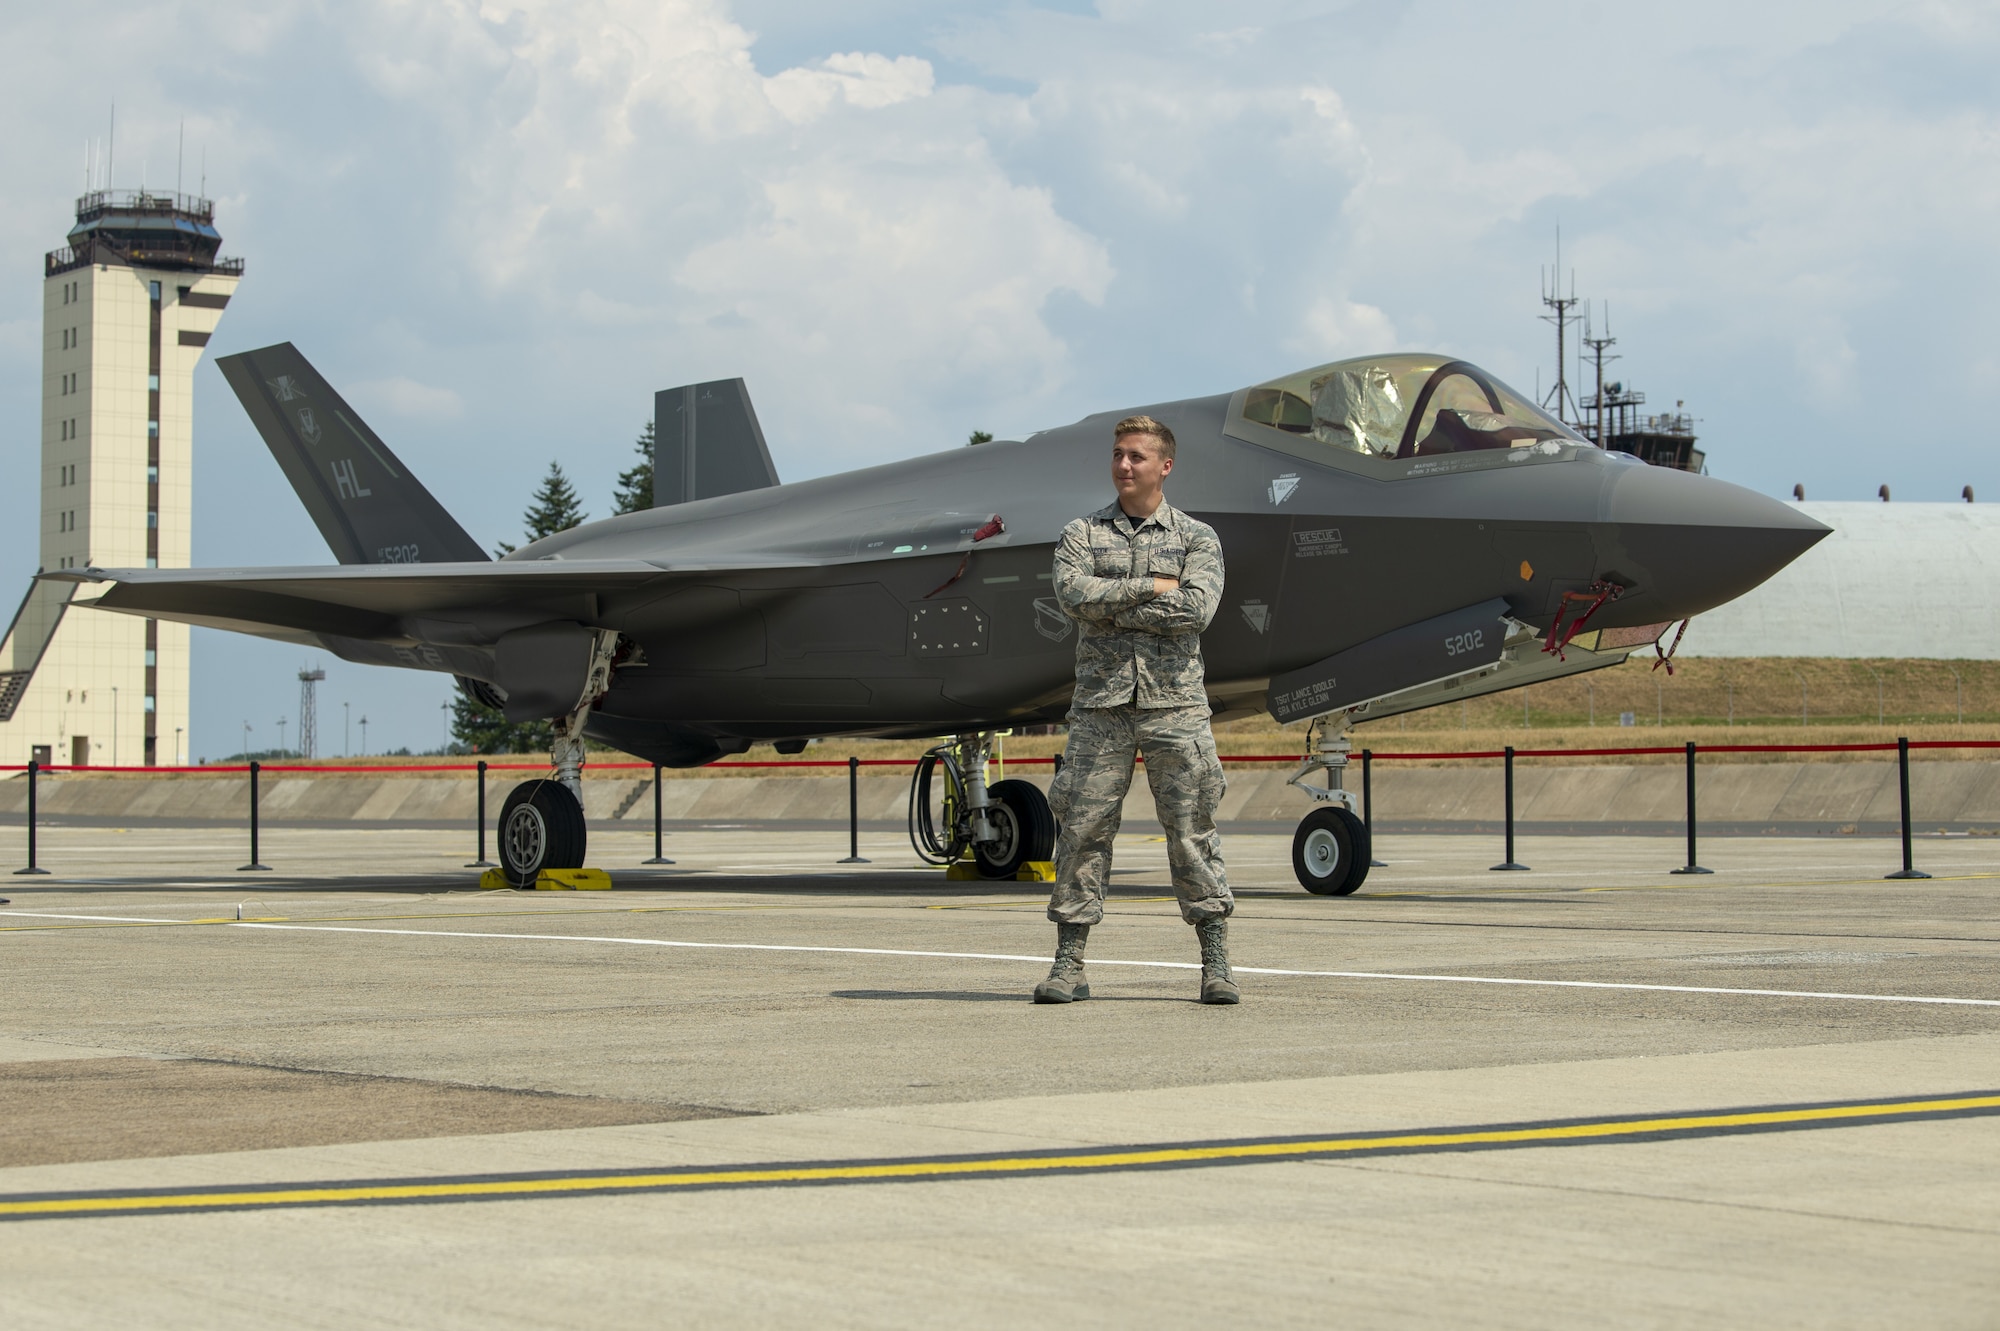 Senior Airman Colby Cook, an F-35A Lightning II crew chief assigned to the 419th Fighter Wing, on the flightline July 26, 2019, at Spangdahlem Air Base, Germany. Cook was deployed with his unit to participate in exercises and conduct training with other Europe-based aircraft as part of a Theater Security Package. (U.S. Air Force photo by Airman 1st Class Branden Rae)